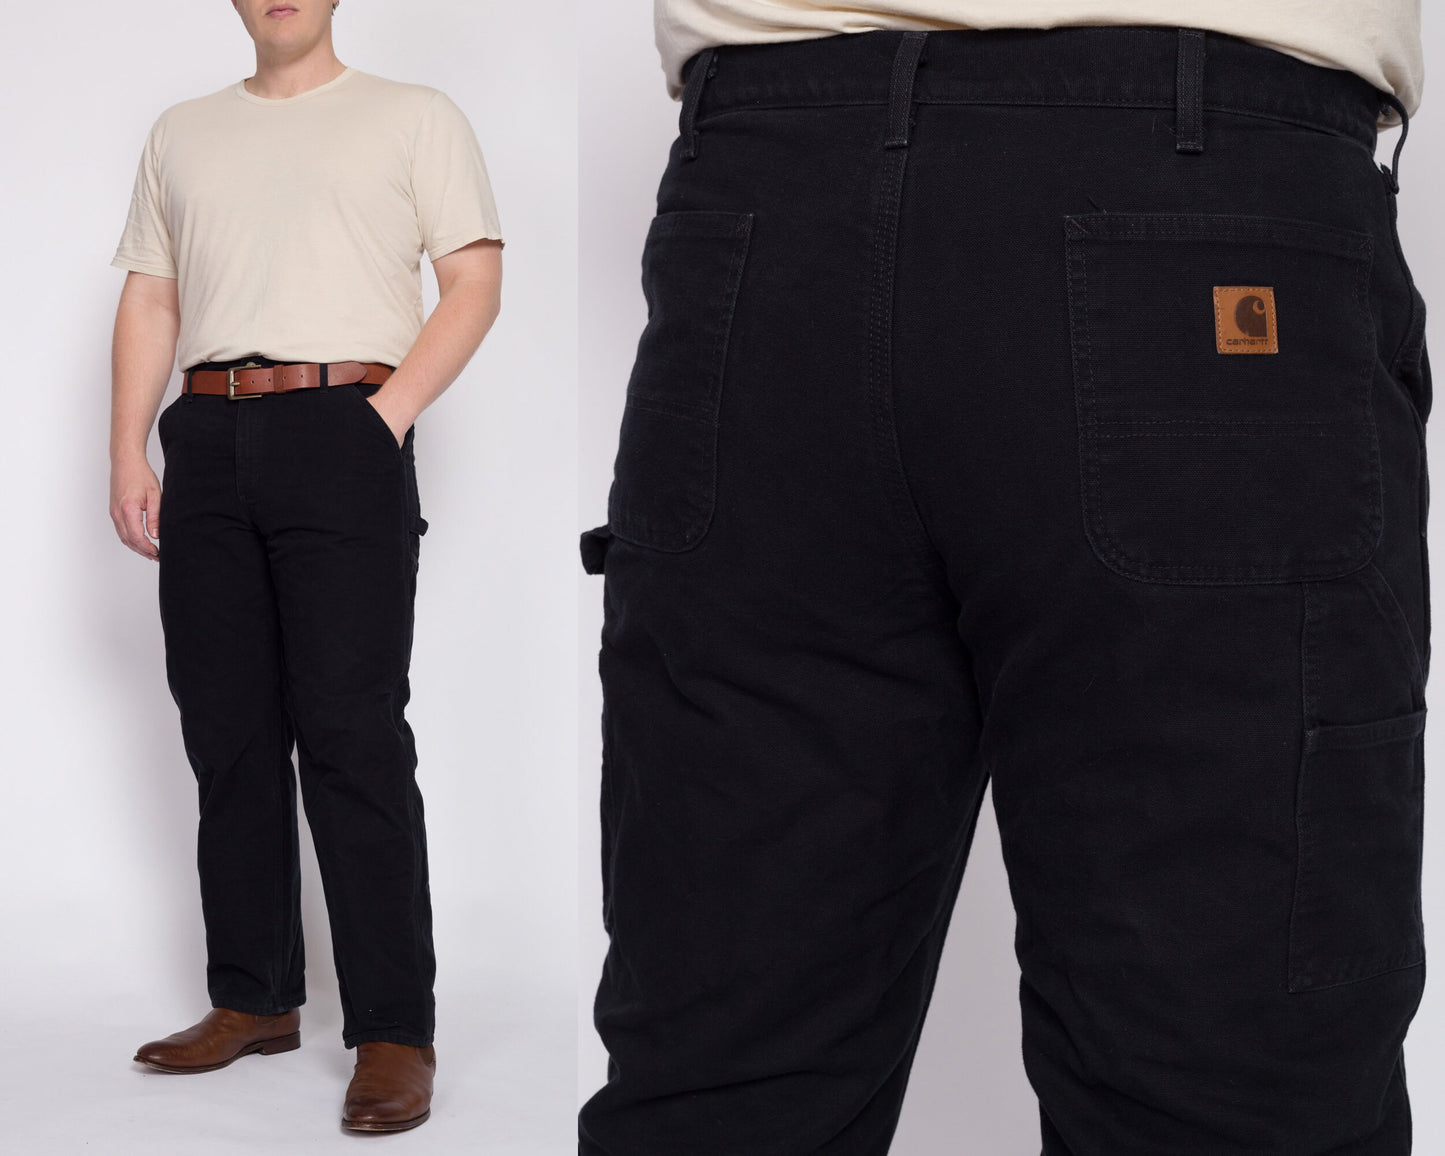 carhartt double front dungarees pants｜TikTok Search